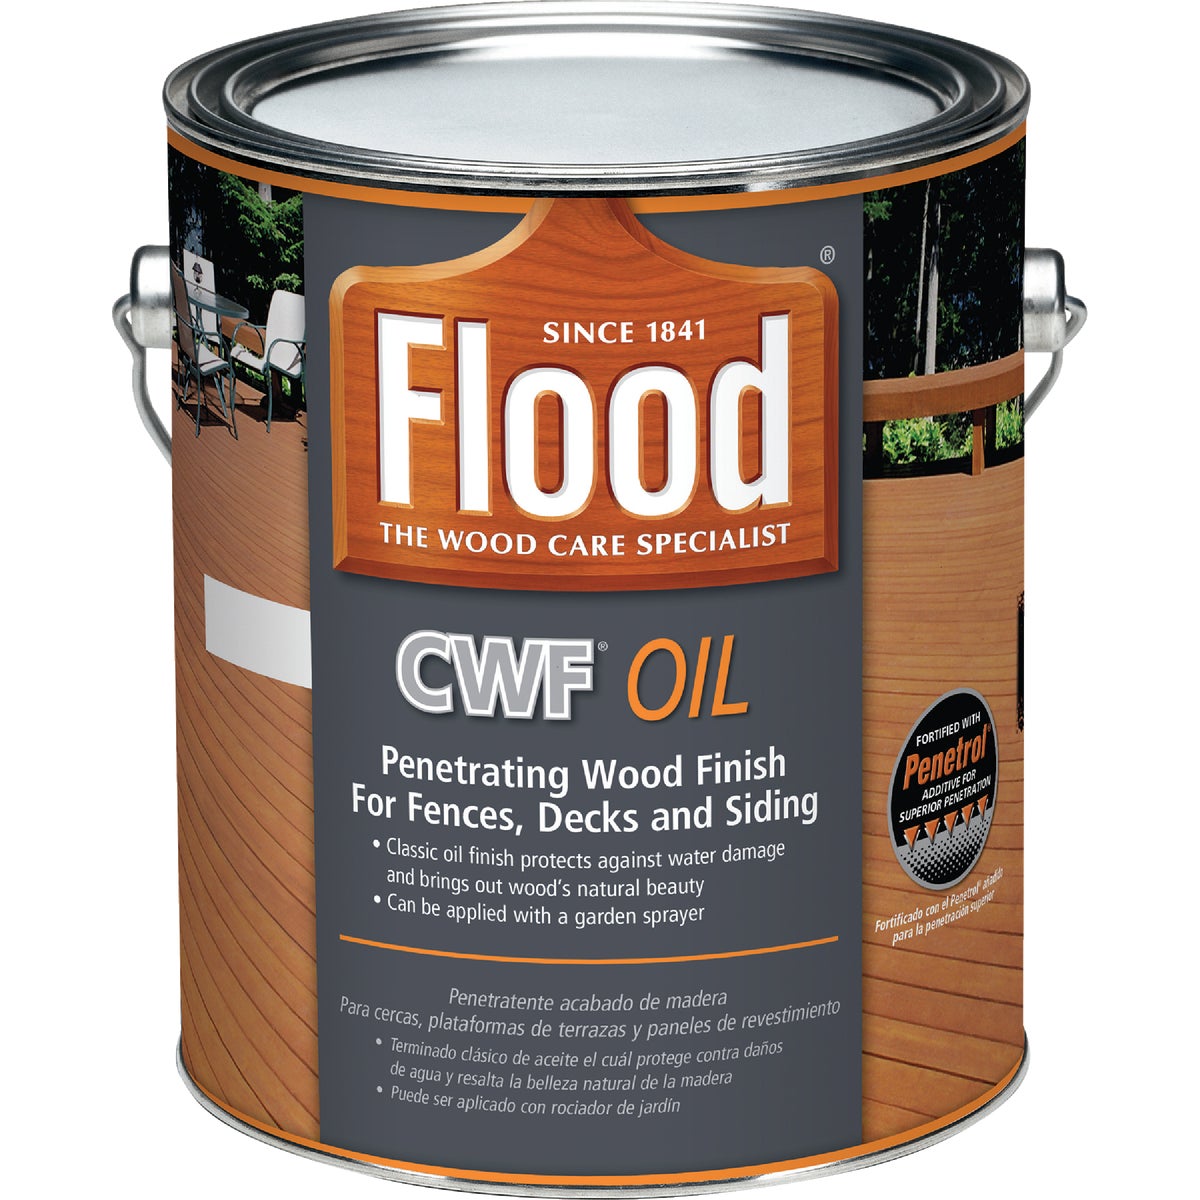 Item 777846, CWF is designed for use on quality exterior wood siding such as redwood, 